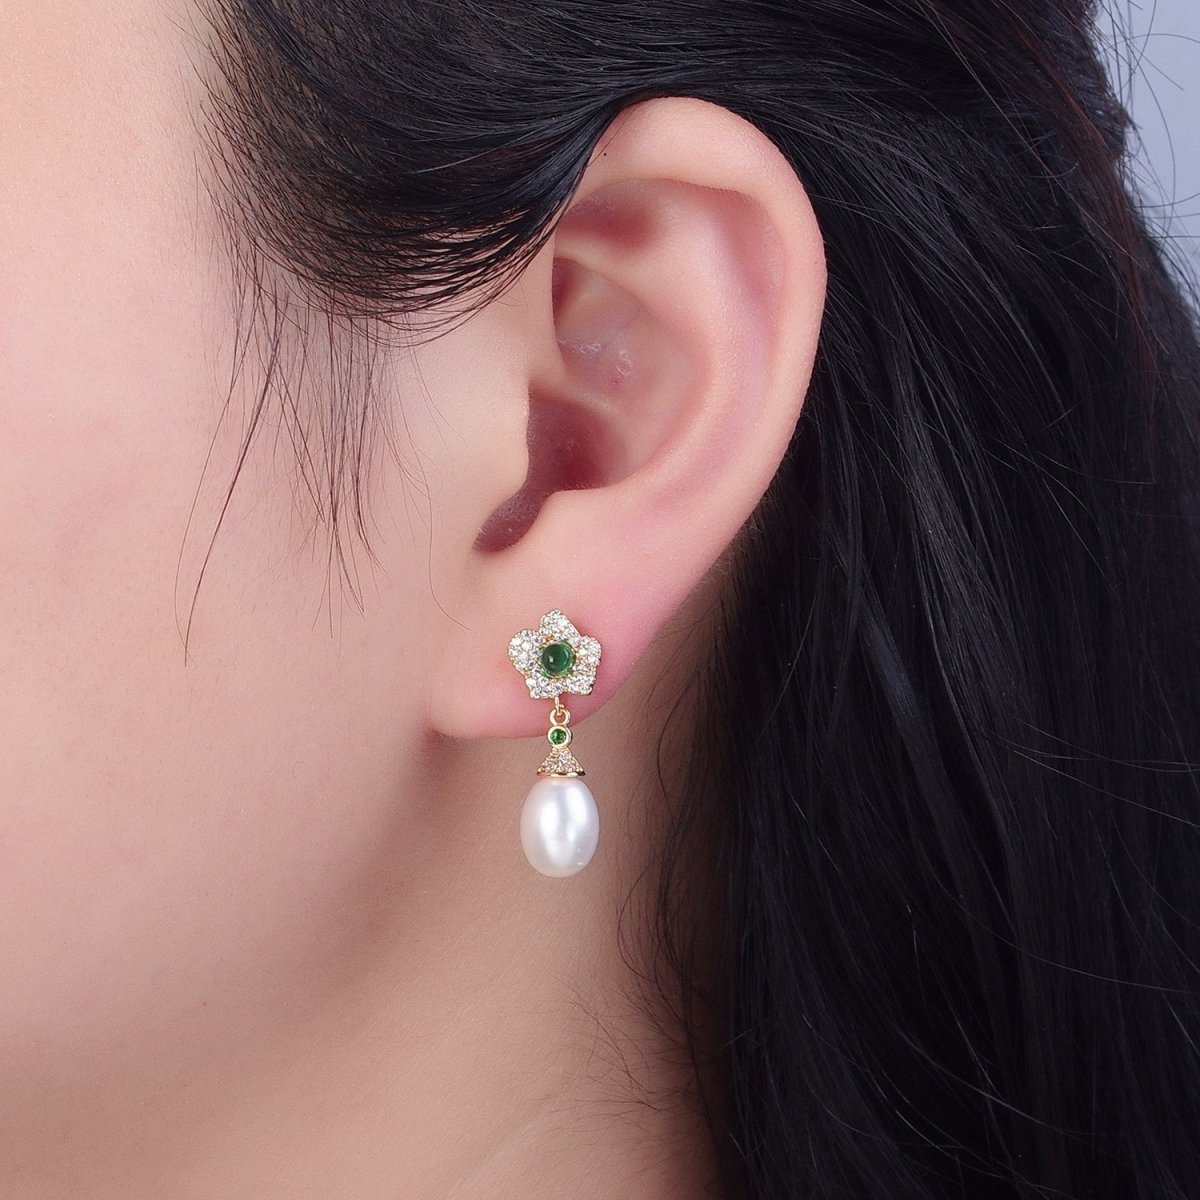 Dainty Round Pearl Stud Earring with Pave Green Flower for Wedding Jewelry T-538 - DLUXCA